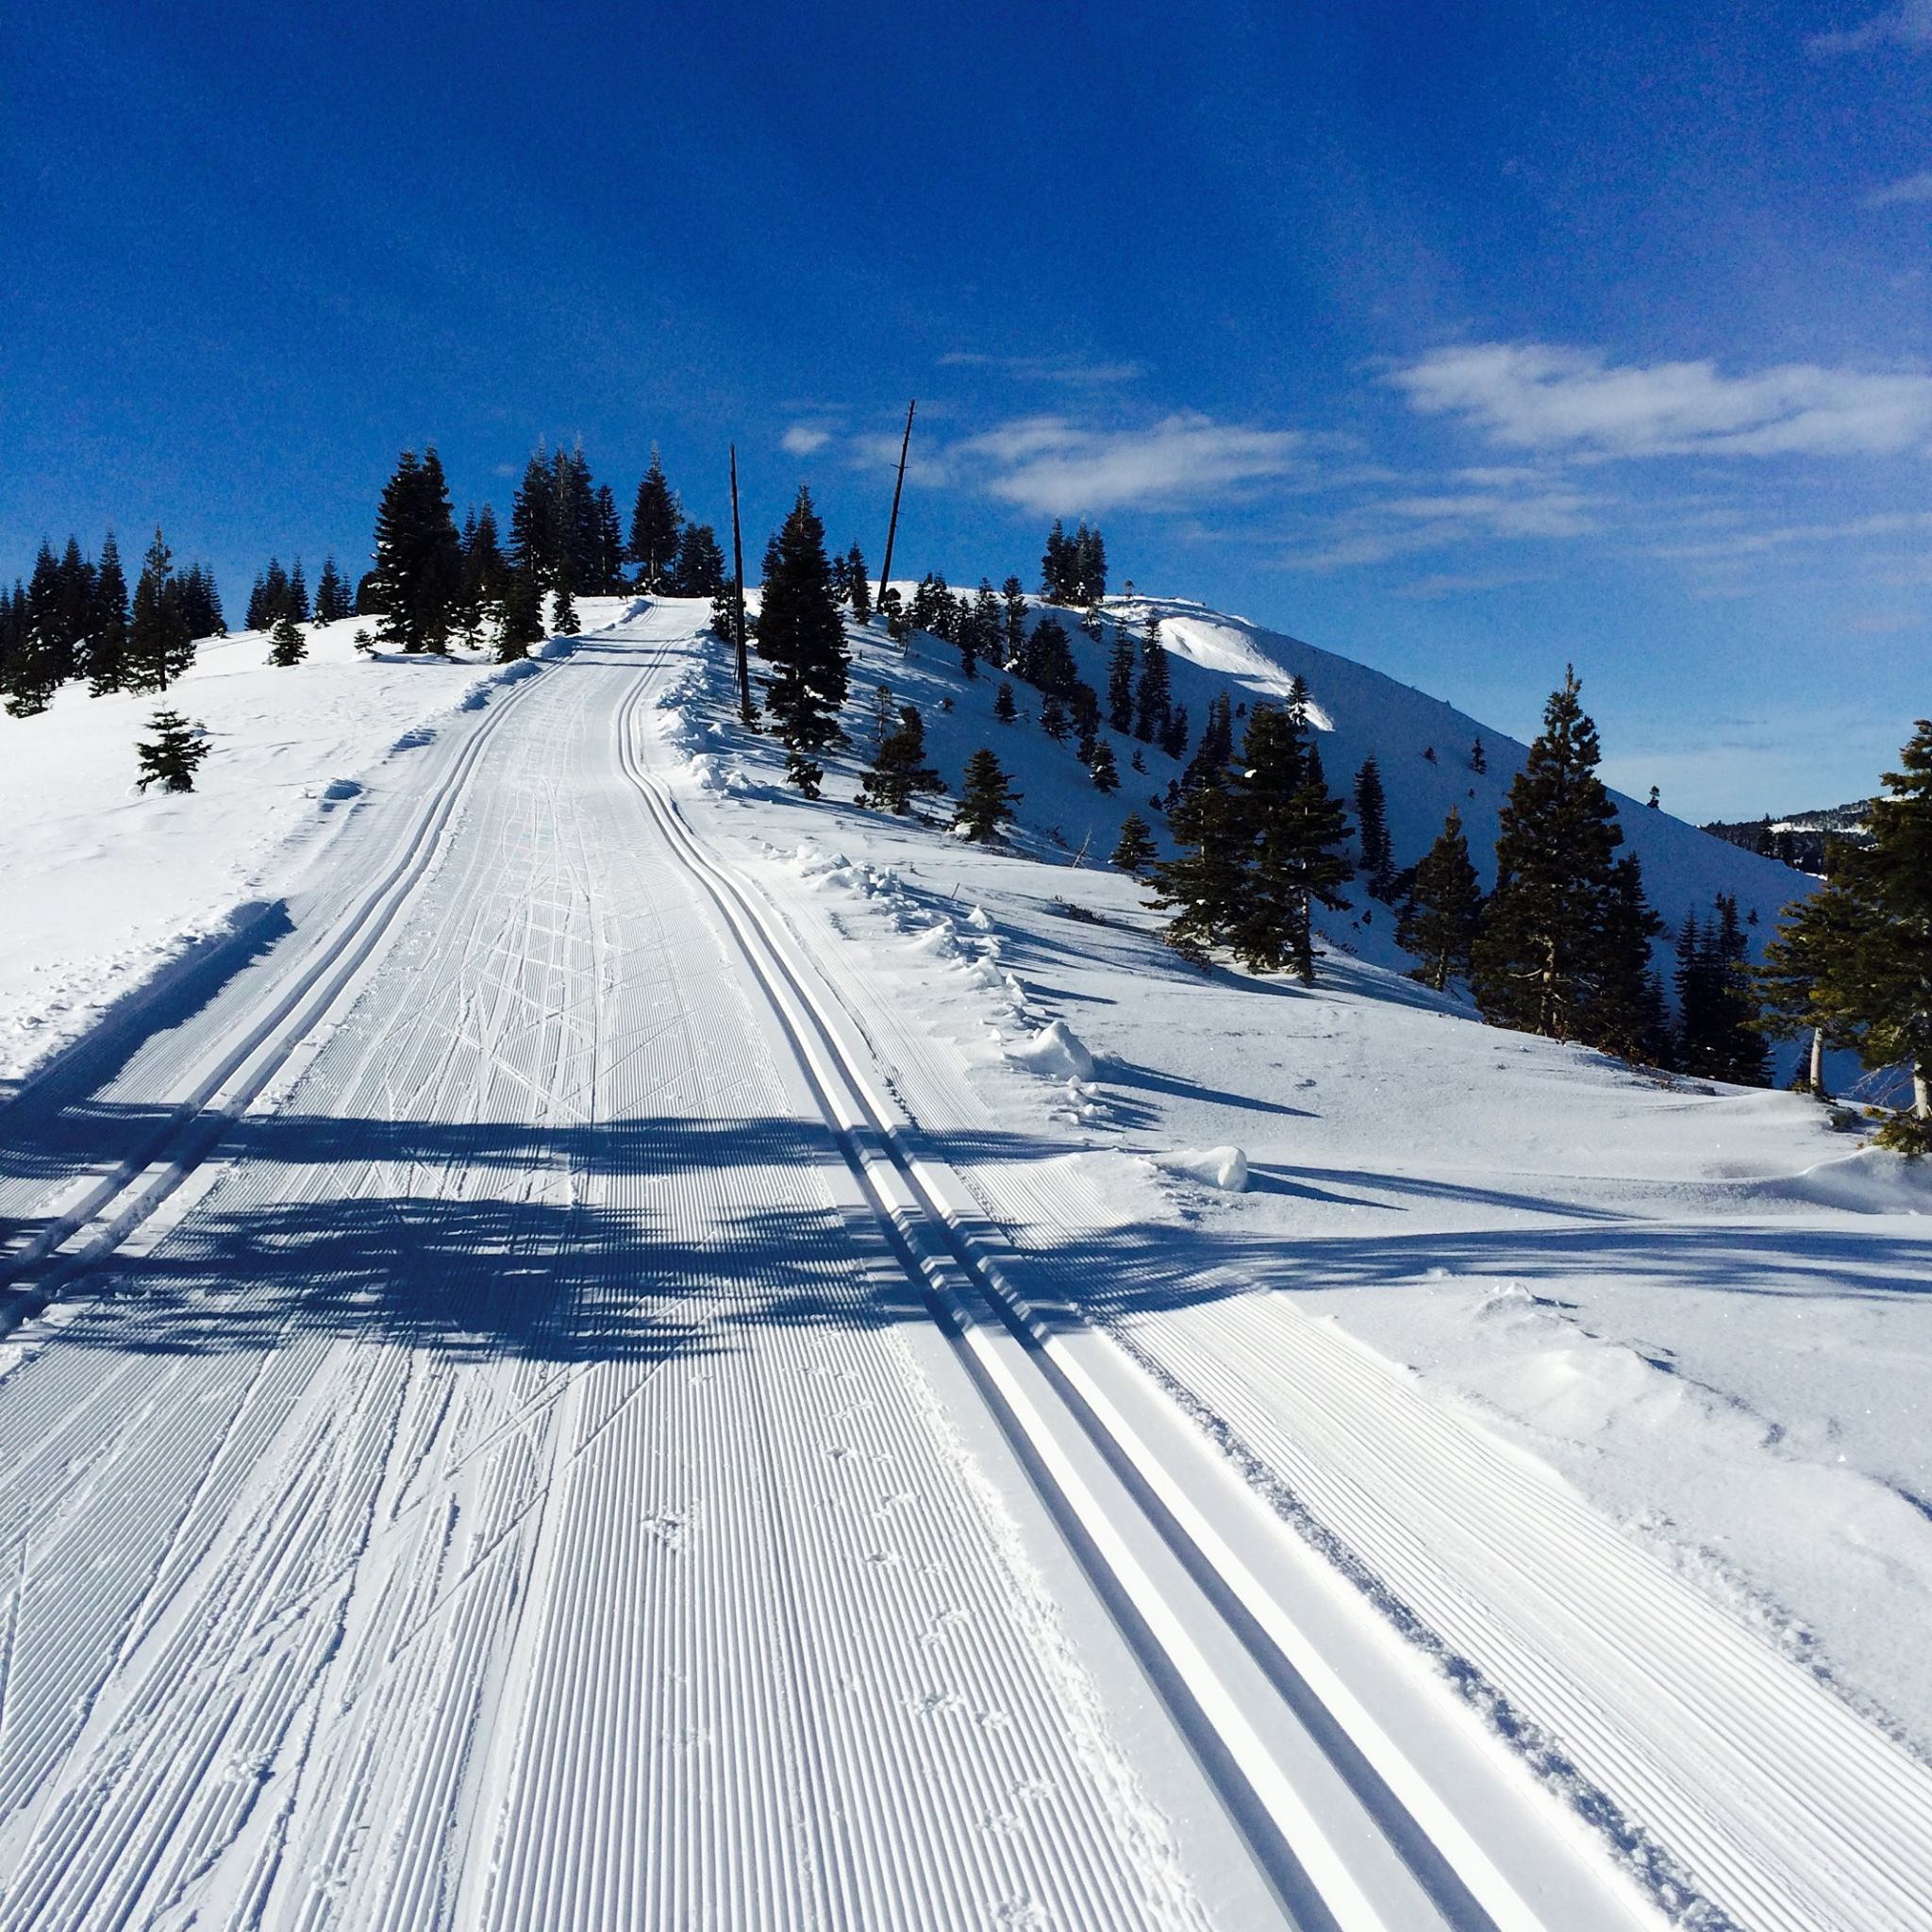 Tahoe Donner Cross Country to Host Inaugural Winter Festival First